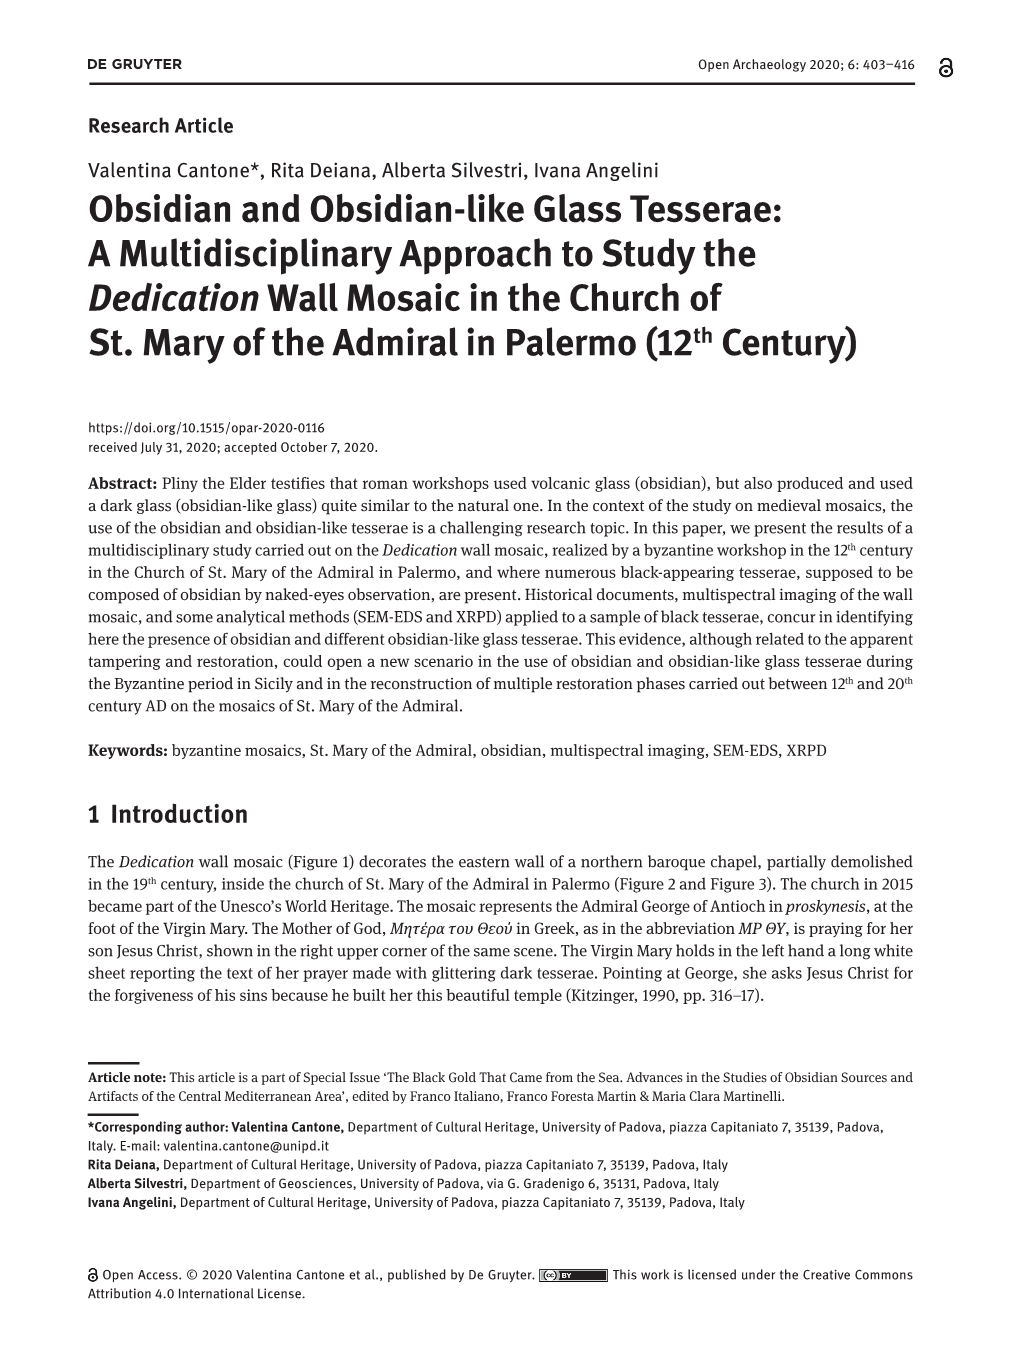 Obsidian and Obsidian-Like Glass Tesserae: a Multidisciplinary Approach to Study the Dedication Wall Mosaic in the Church of St